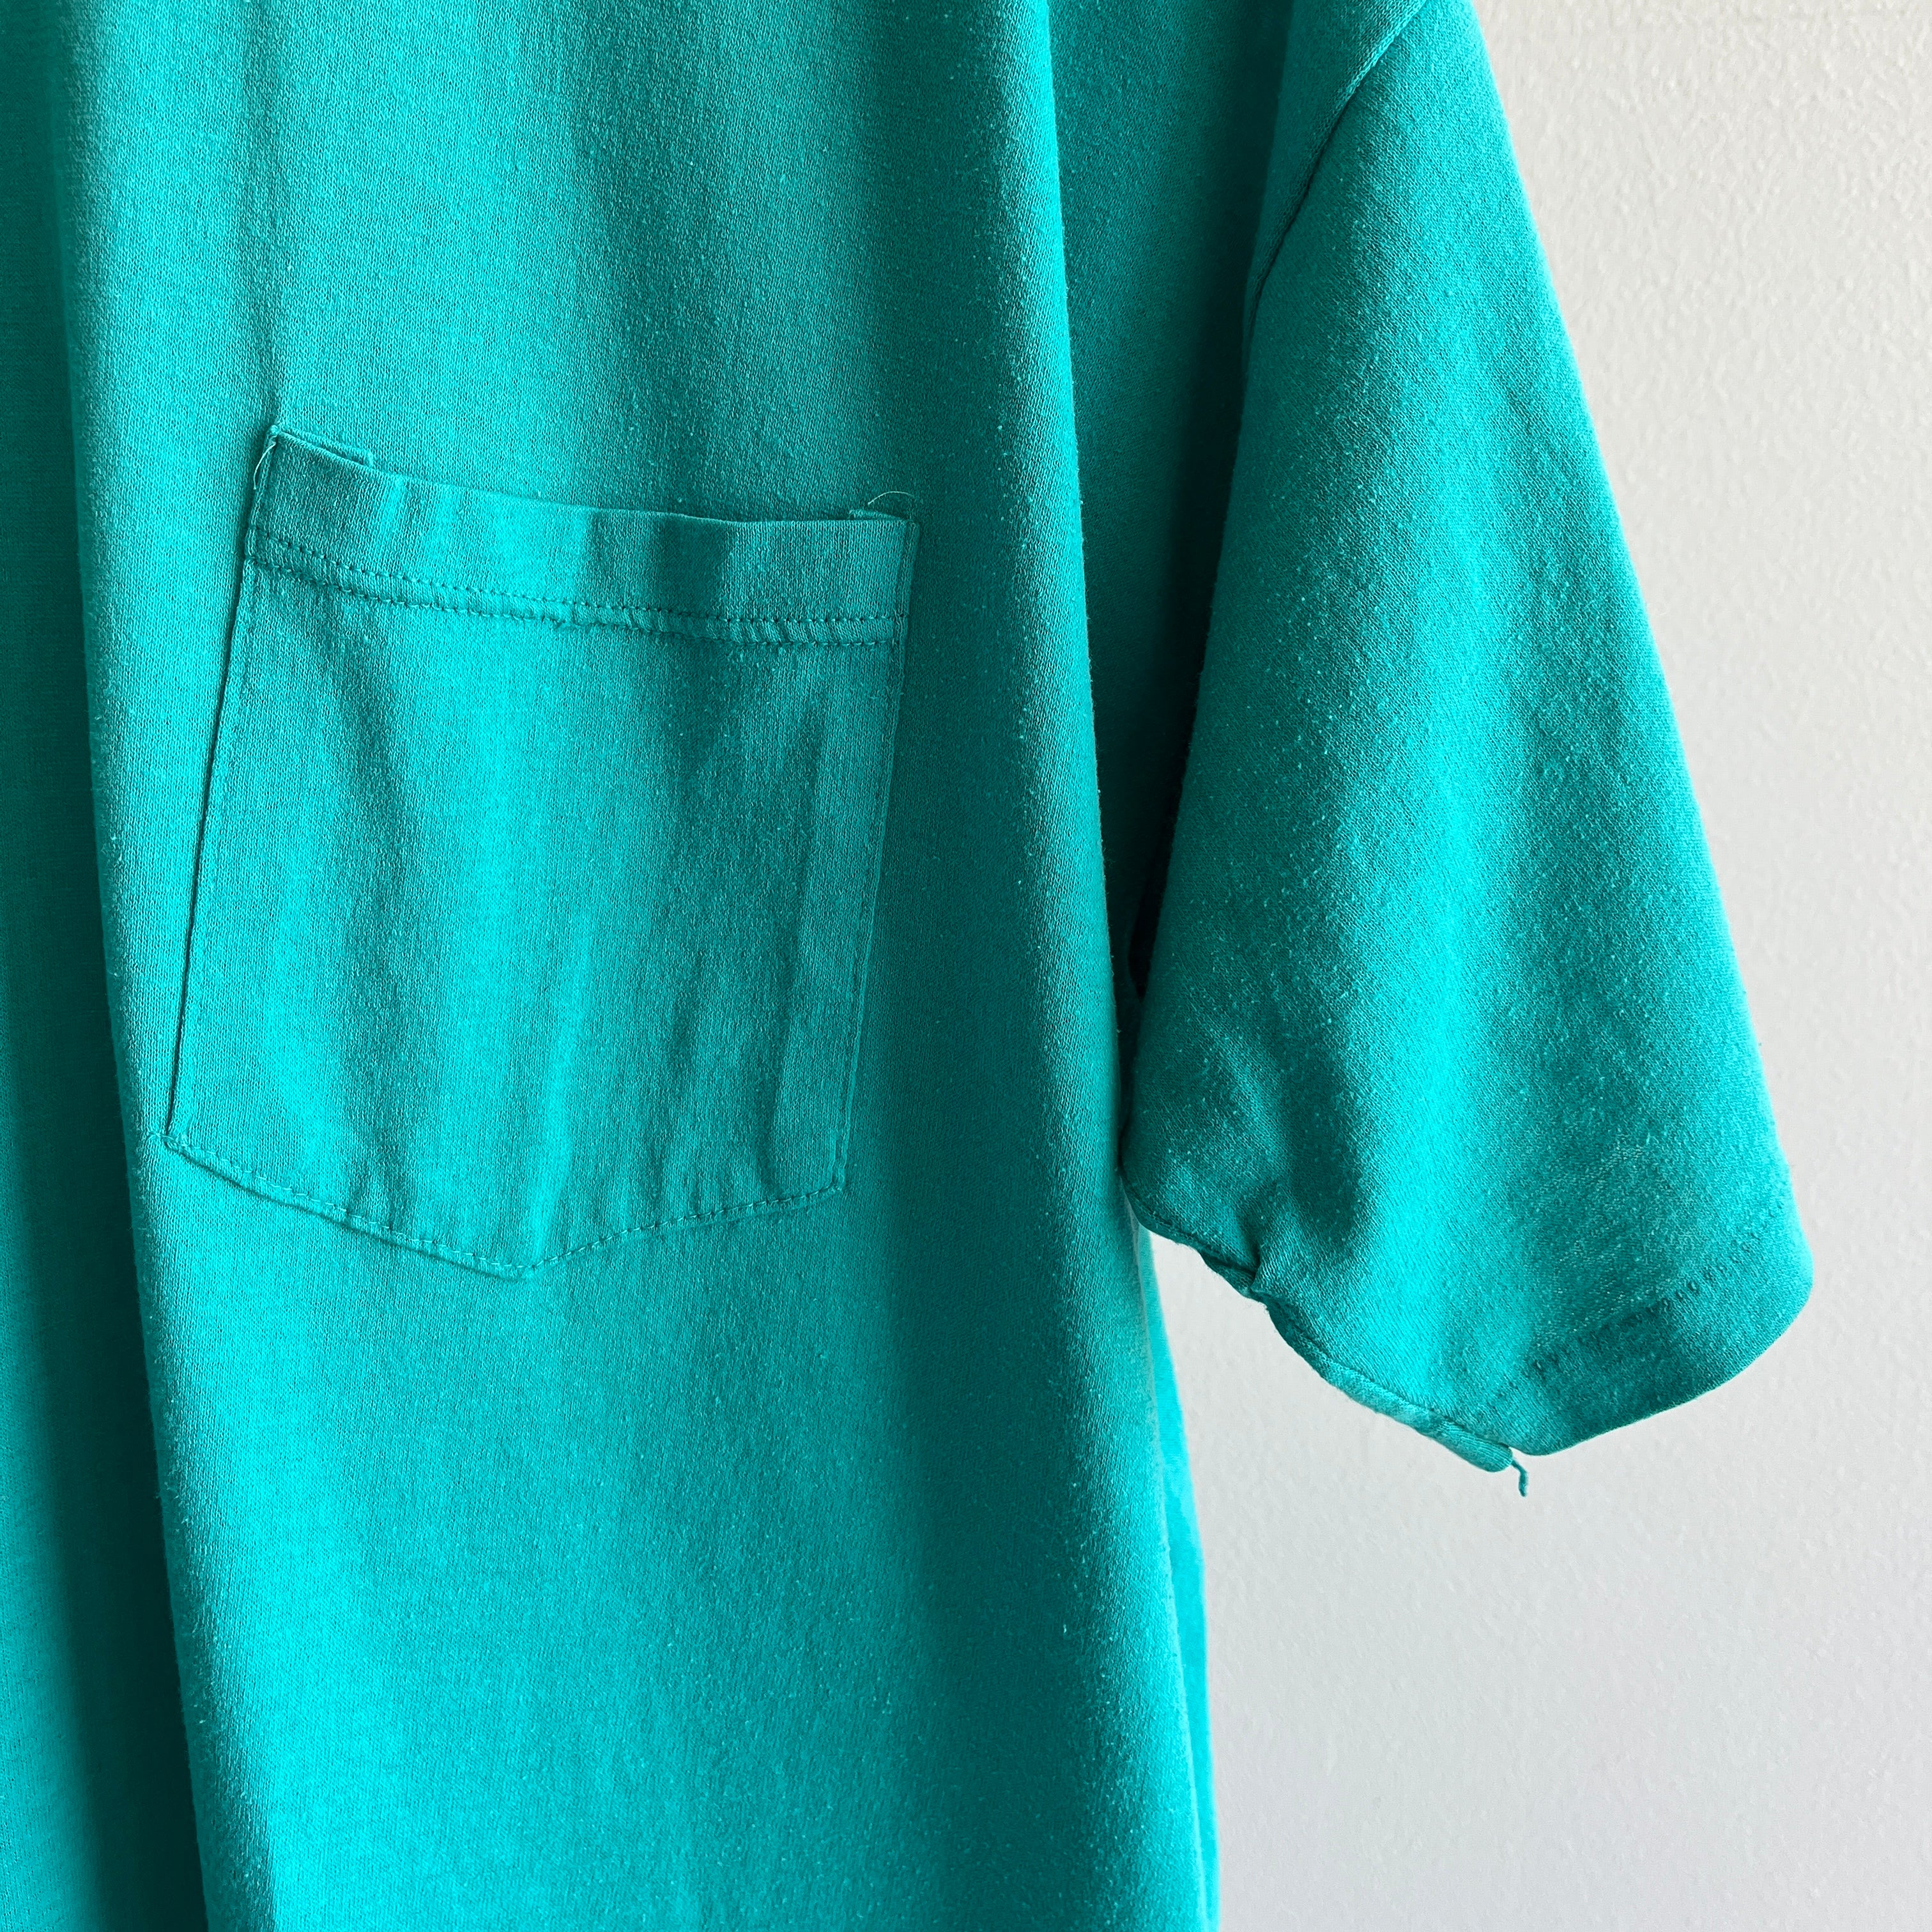 1980s Oversized Blank Teal Pocket T-Shirt (the brand!)